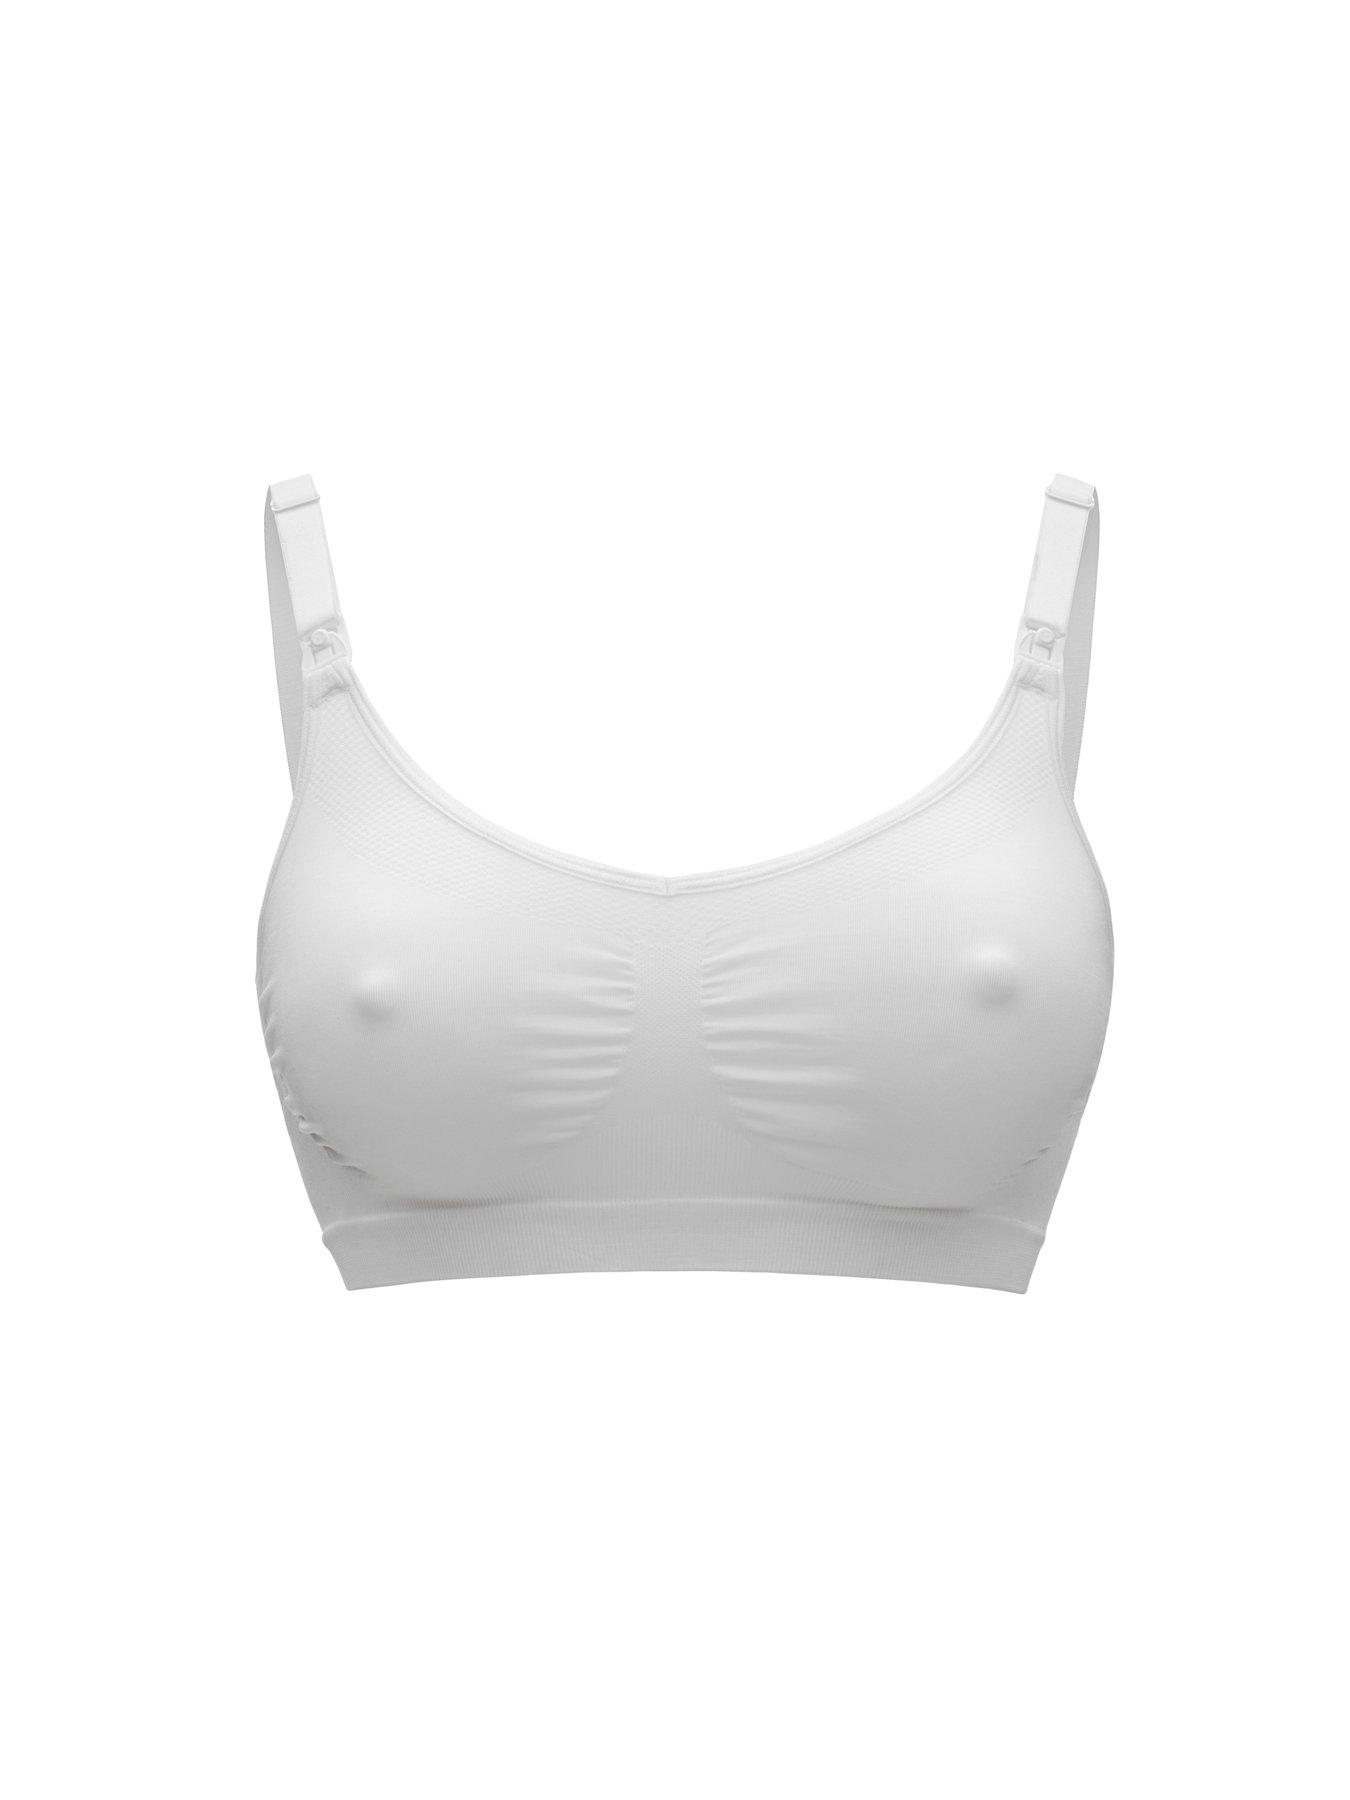 Medela Keep Cool Bra | Seamless Maternity & Nursing Bra with 2 Breathing  Zones and Soft Touch fabric for Comfortable Support